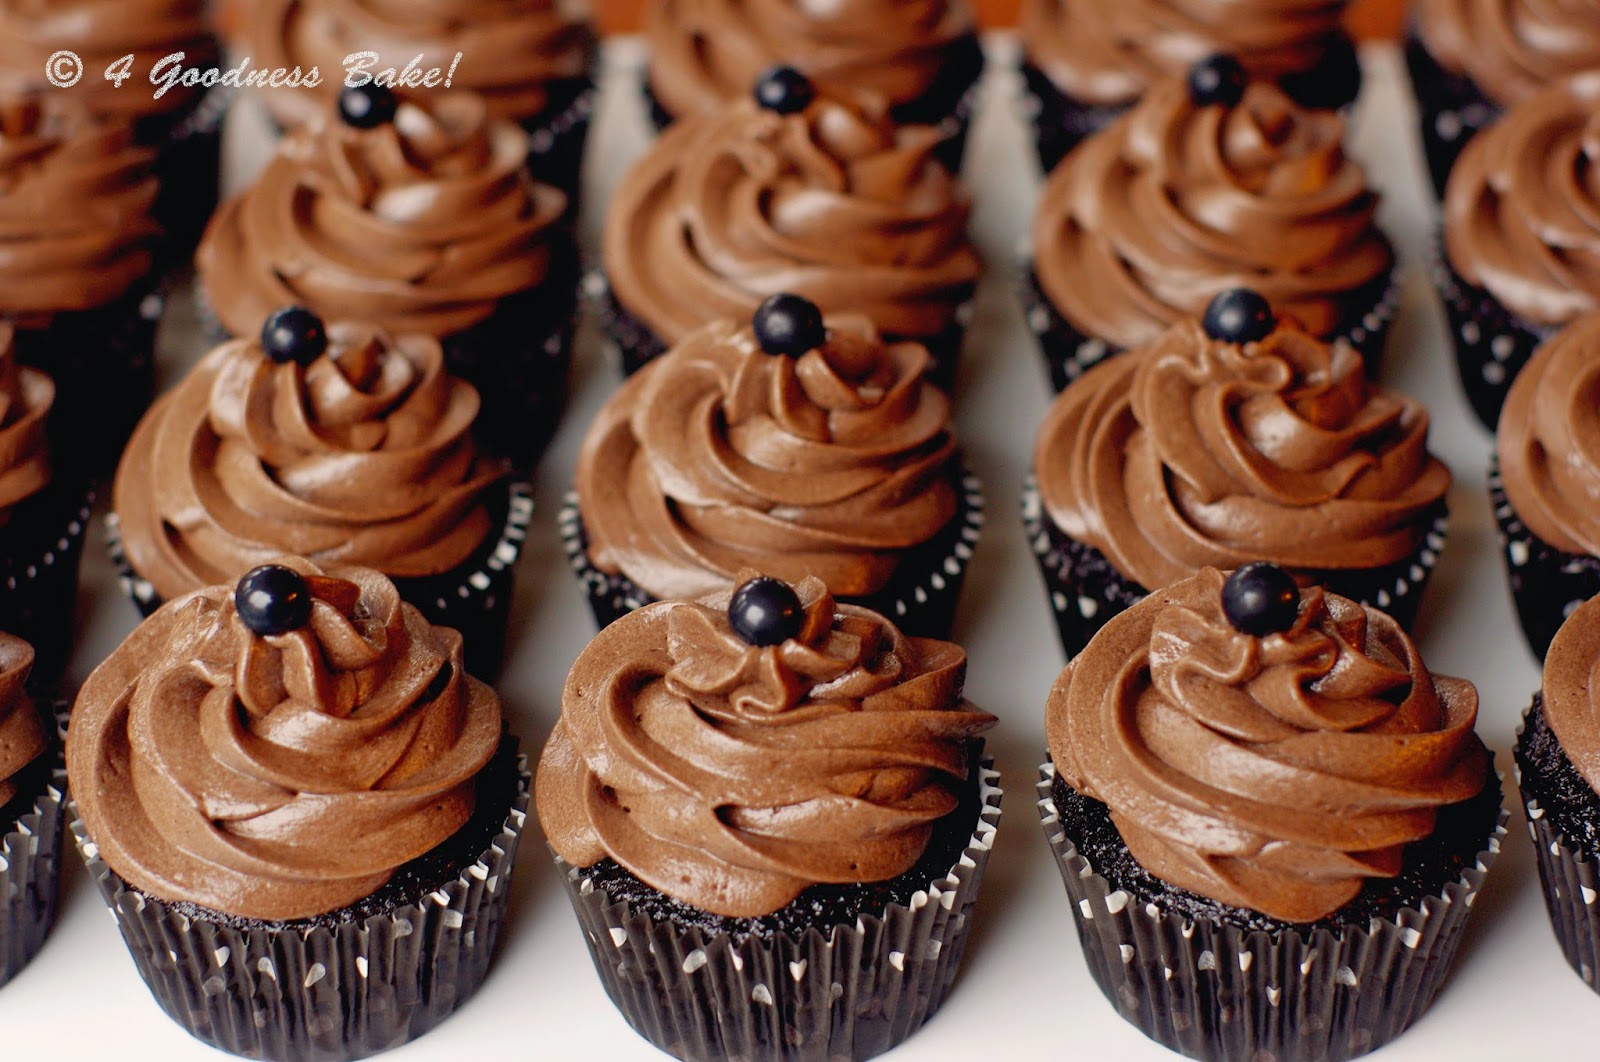 4 goodness bake!: Double Chocolate Cupcakes